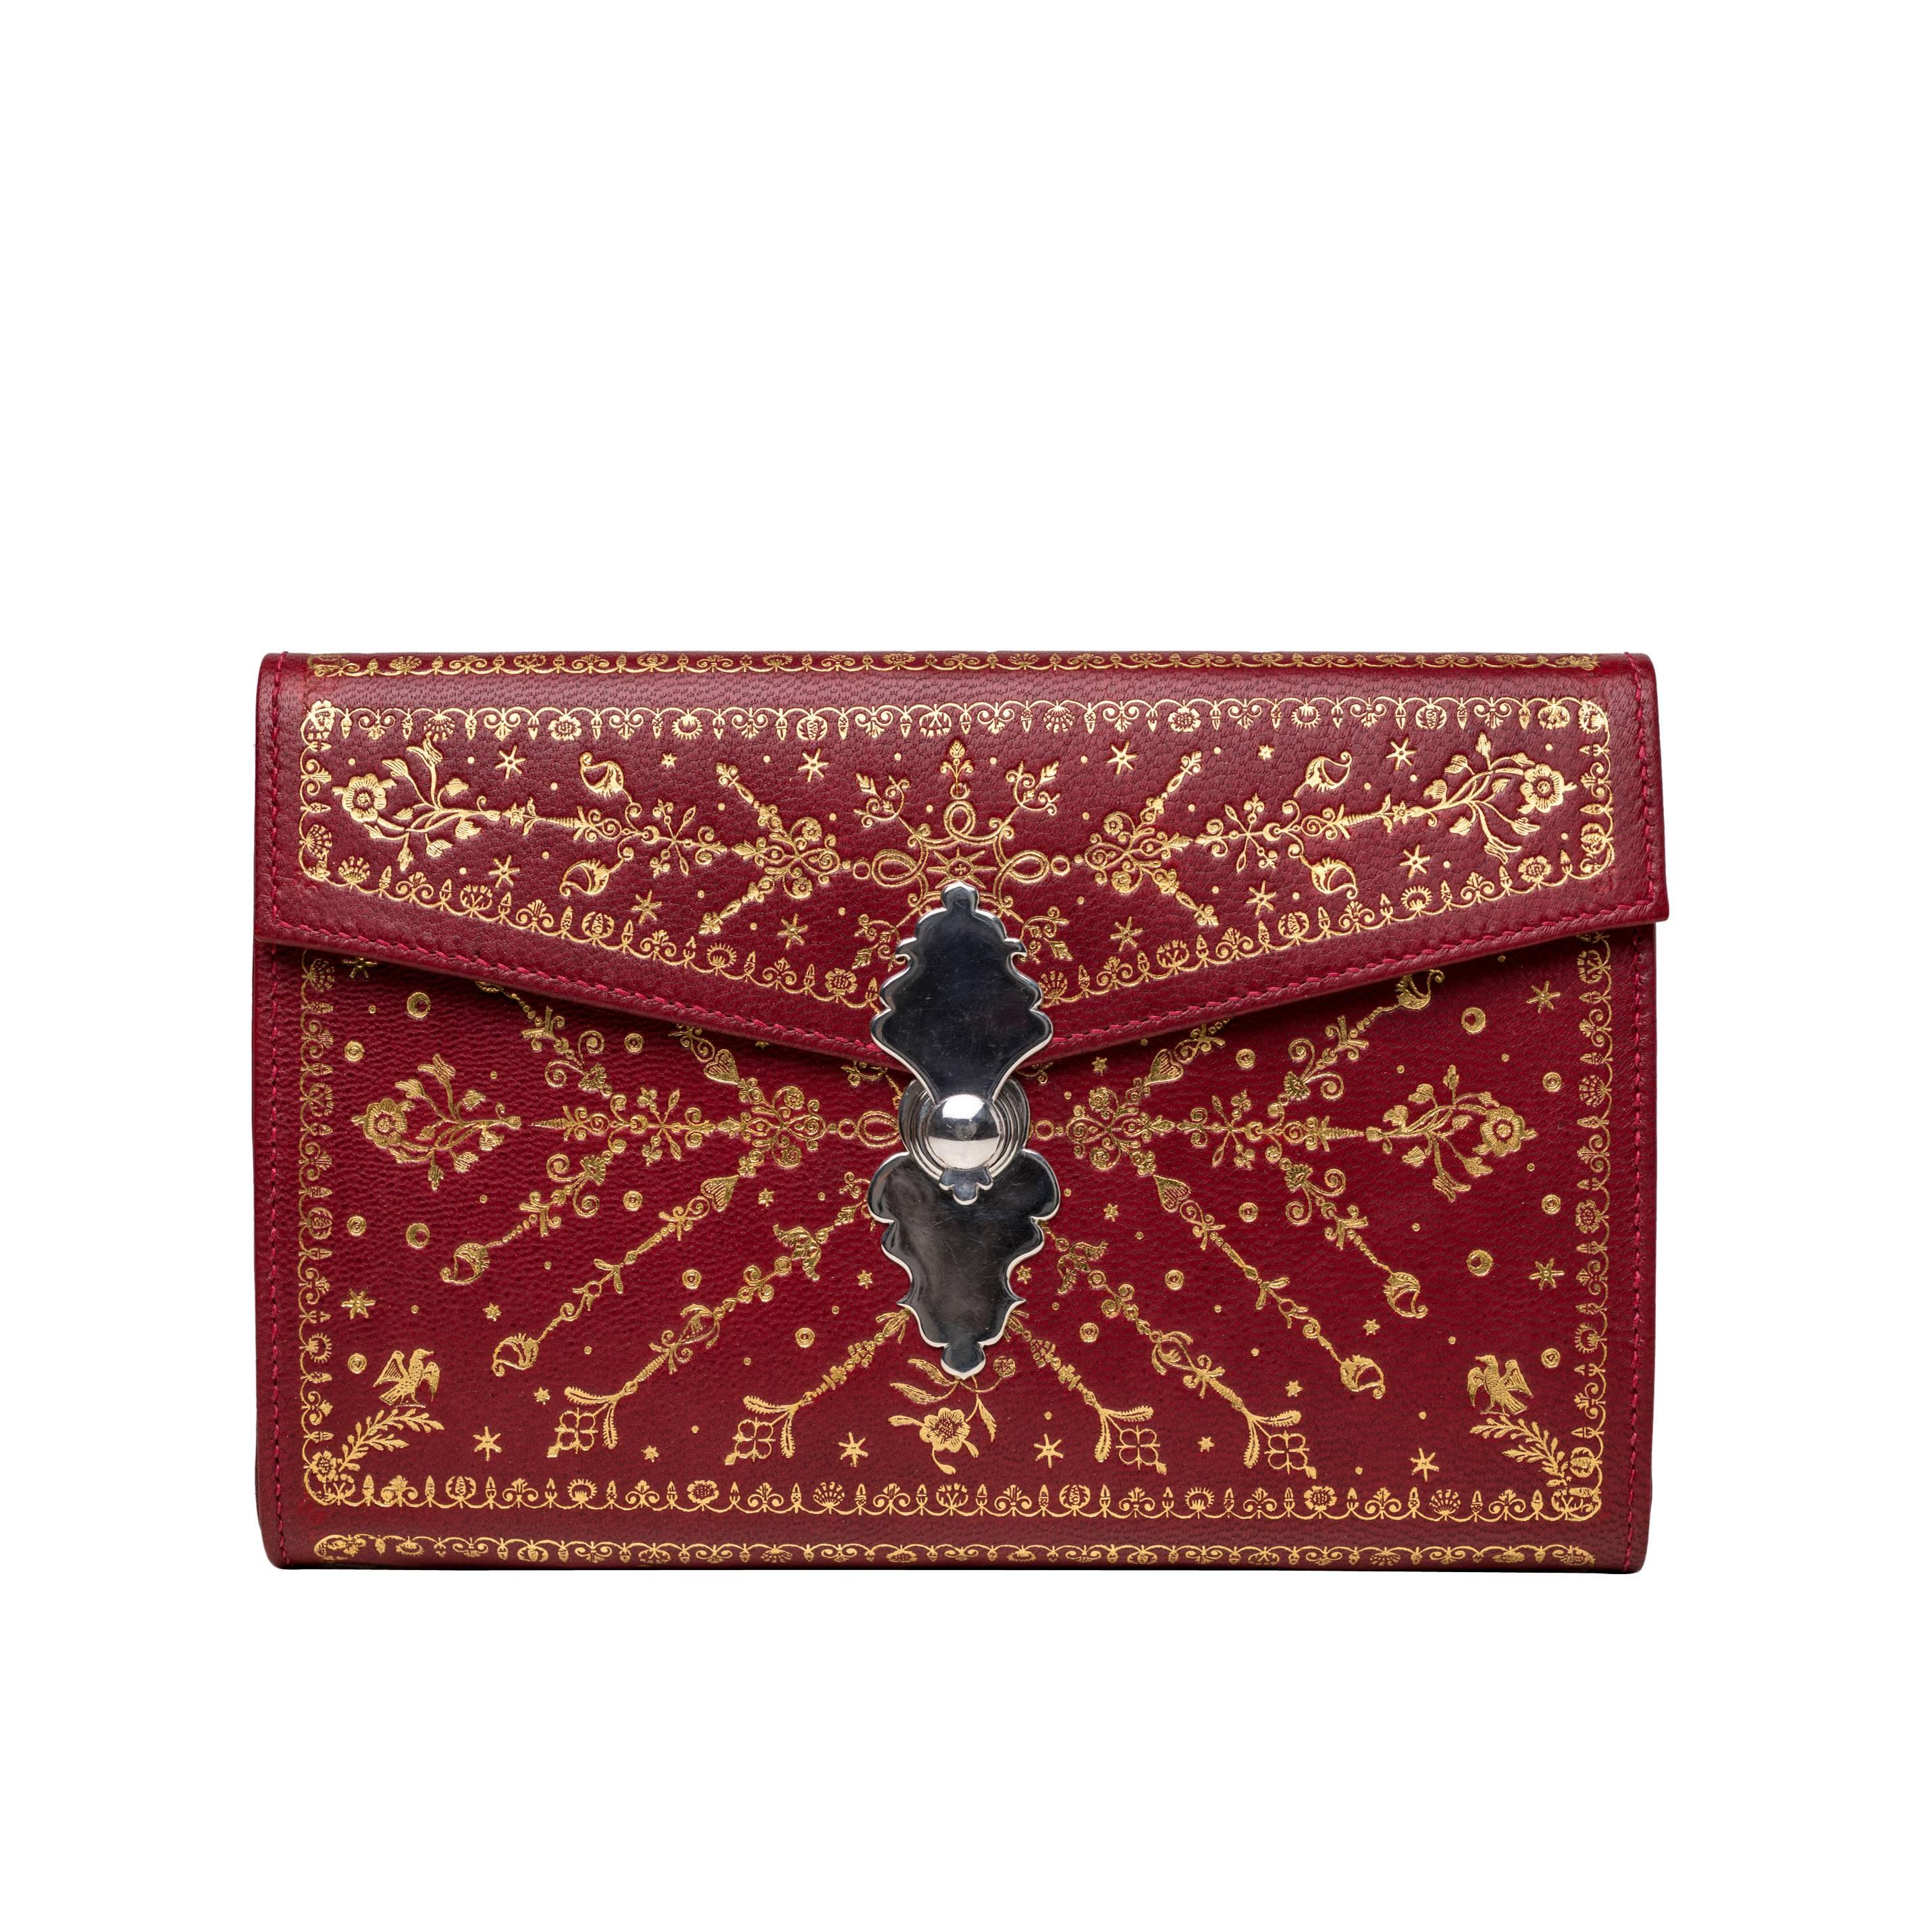 Stanway. Red leather purse hand tooled with gold in eighteenth century style For Sale